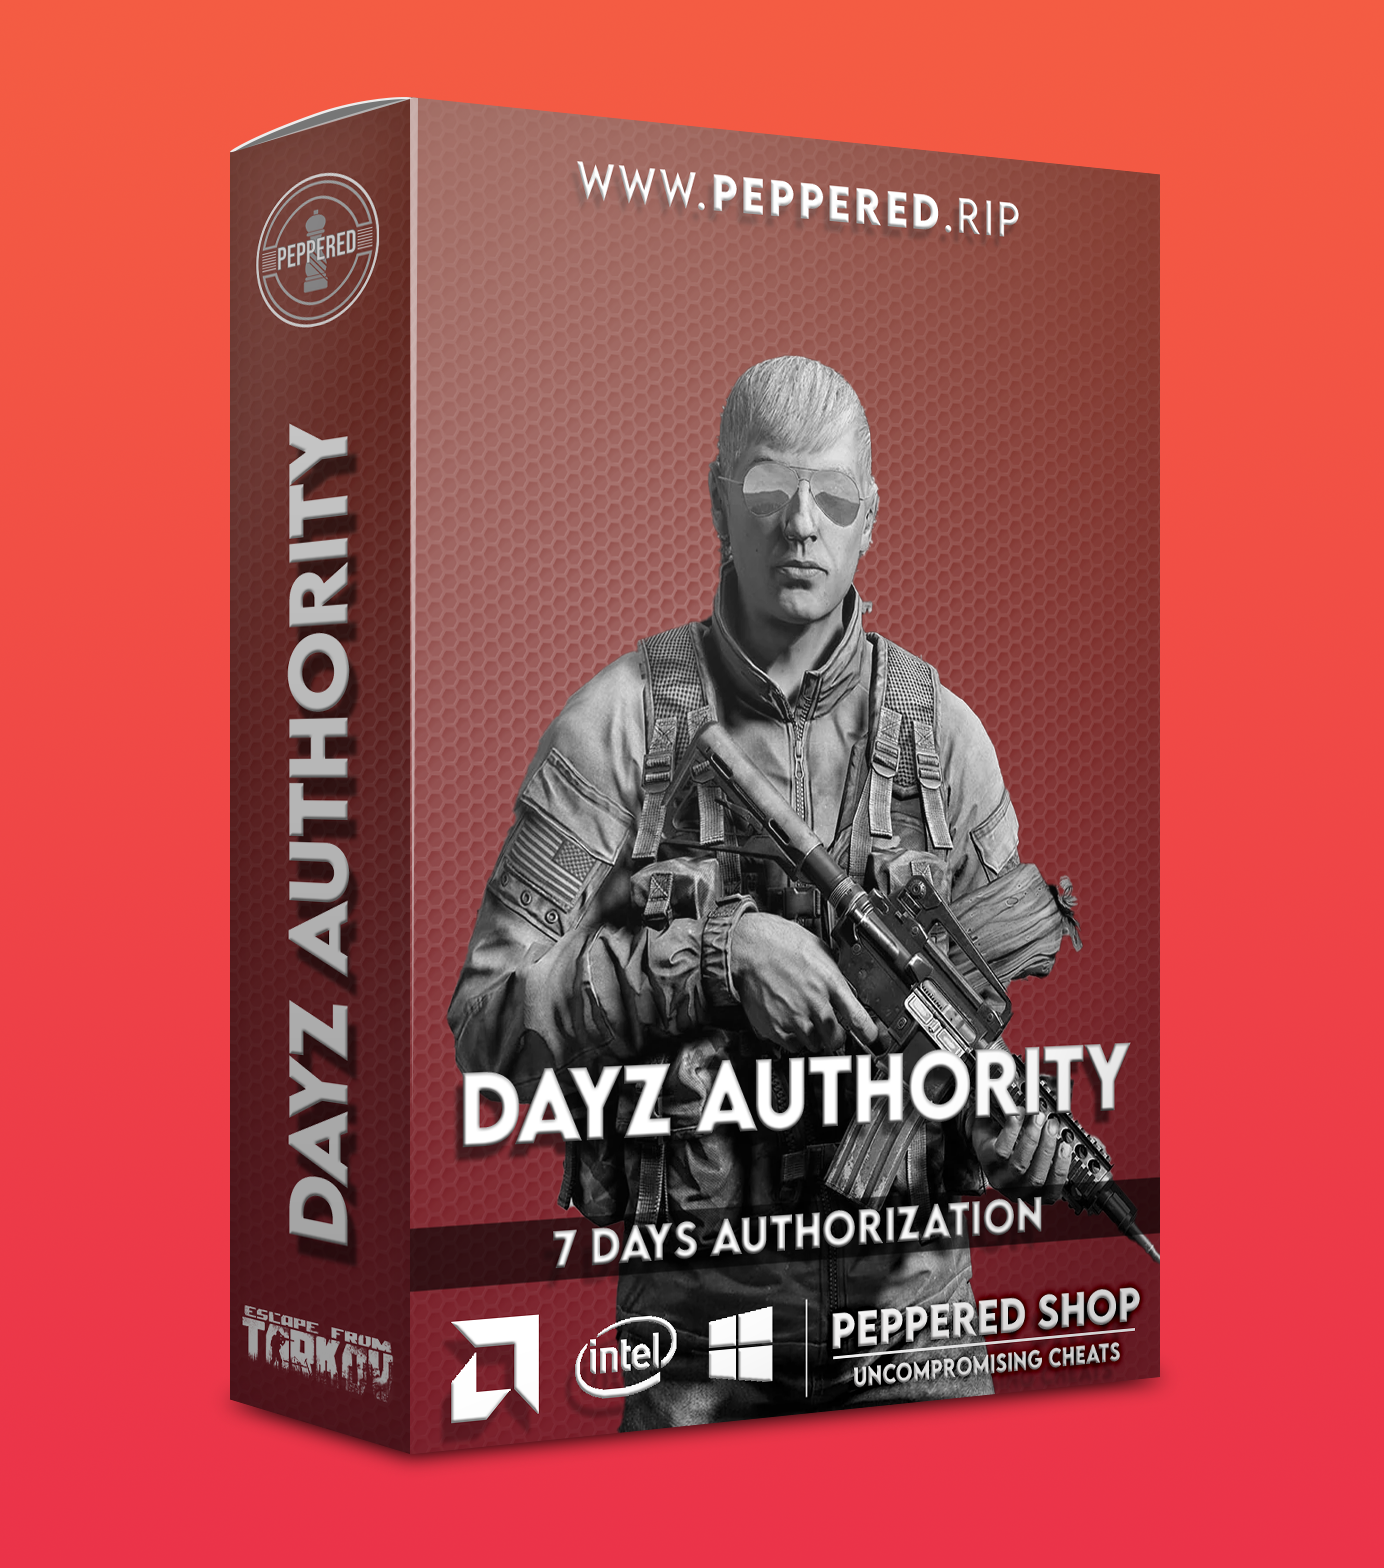 More information about "DAYZ AUTH 7 DAY"